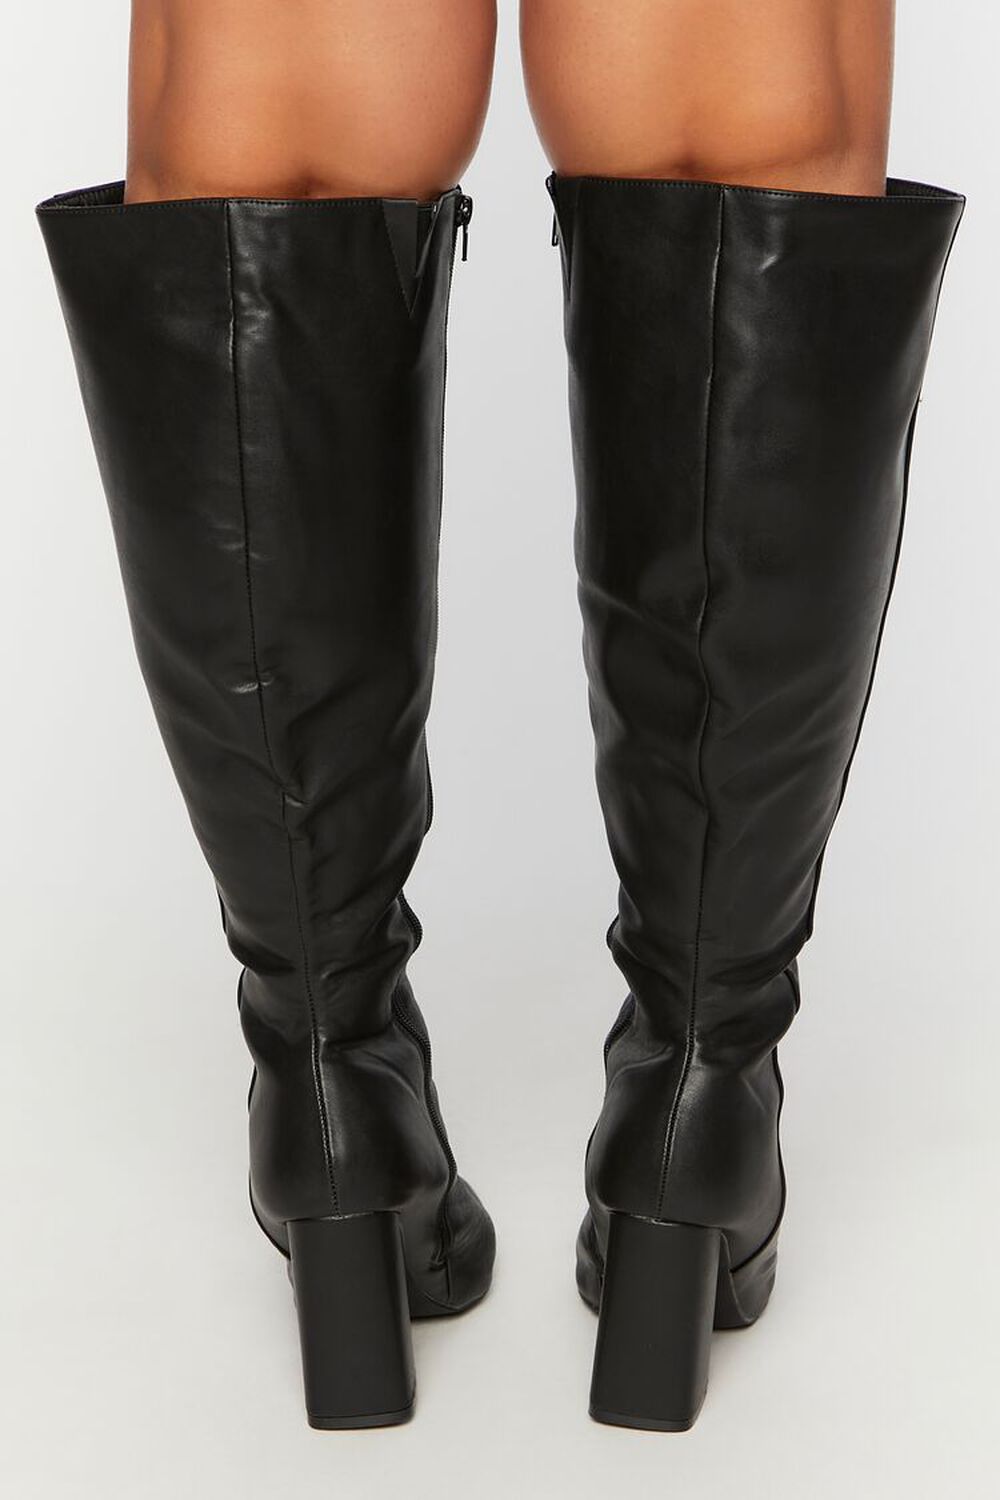 BLACK Faux Leather Knee-High Boots (Wide), image 3